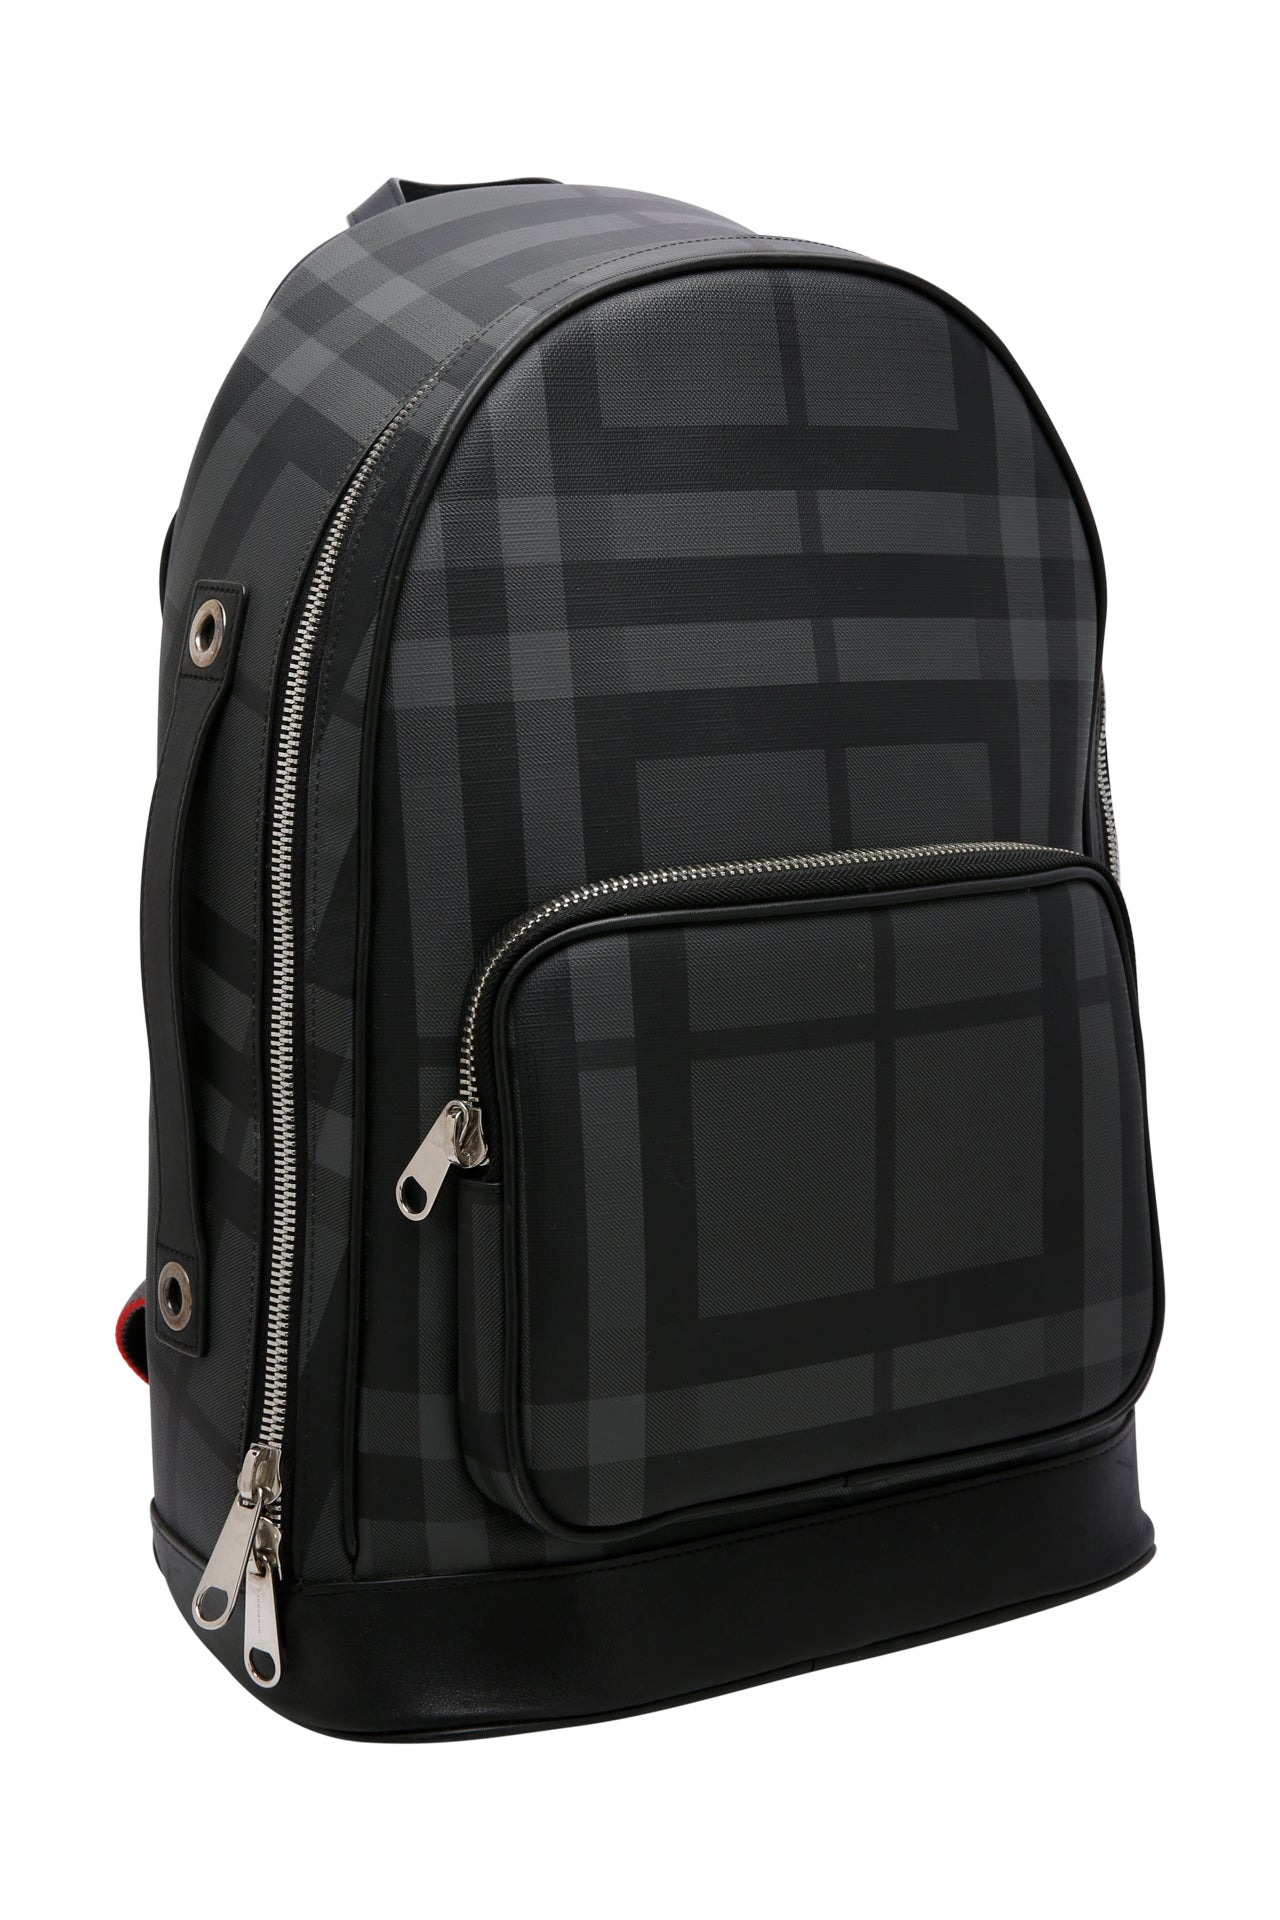 Burberry Backpack in London Check Canvas and Leather Dark Charcoal